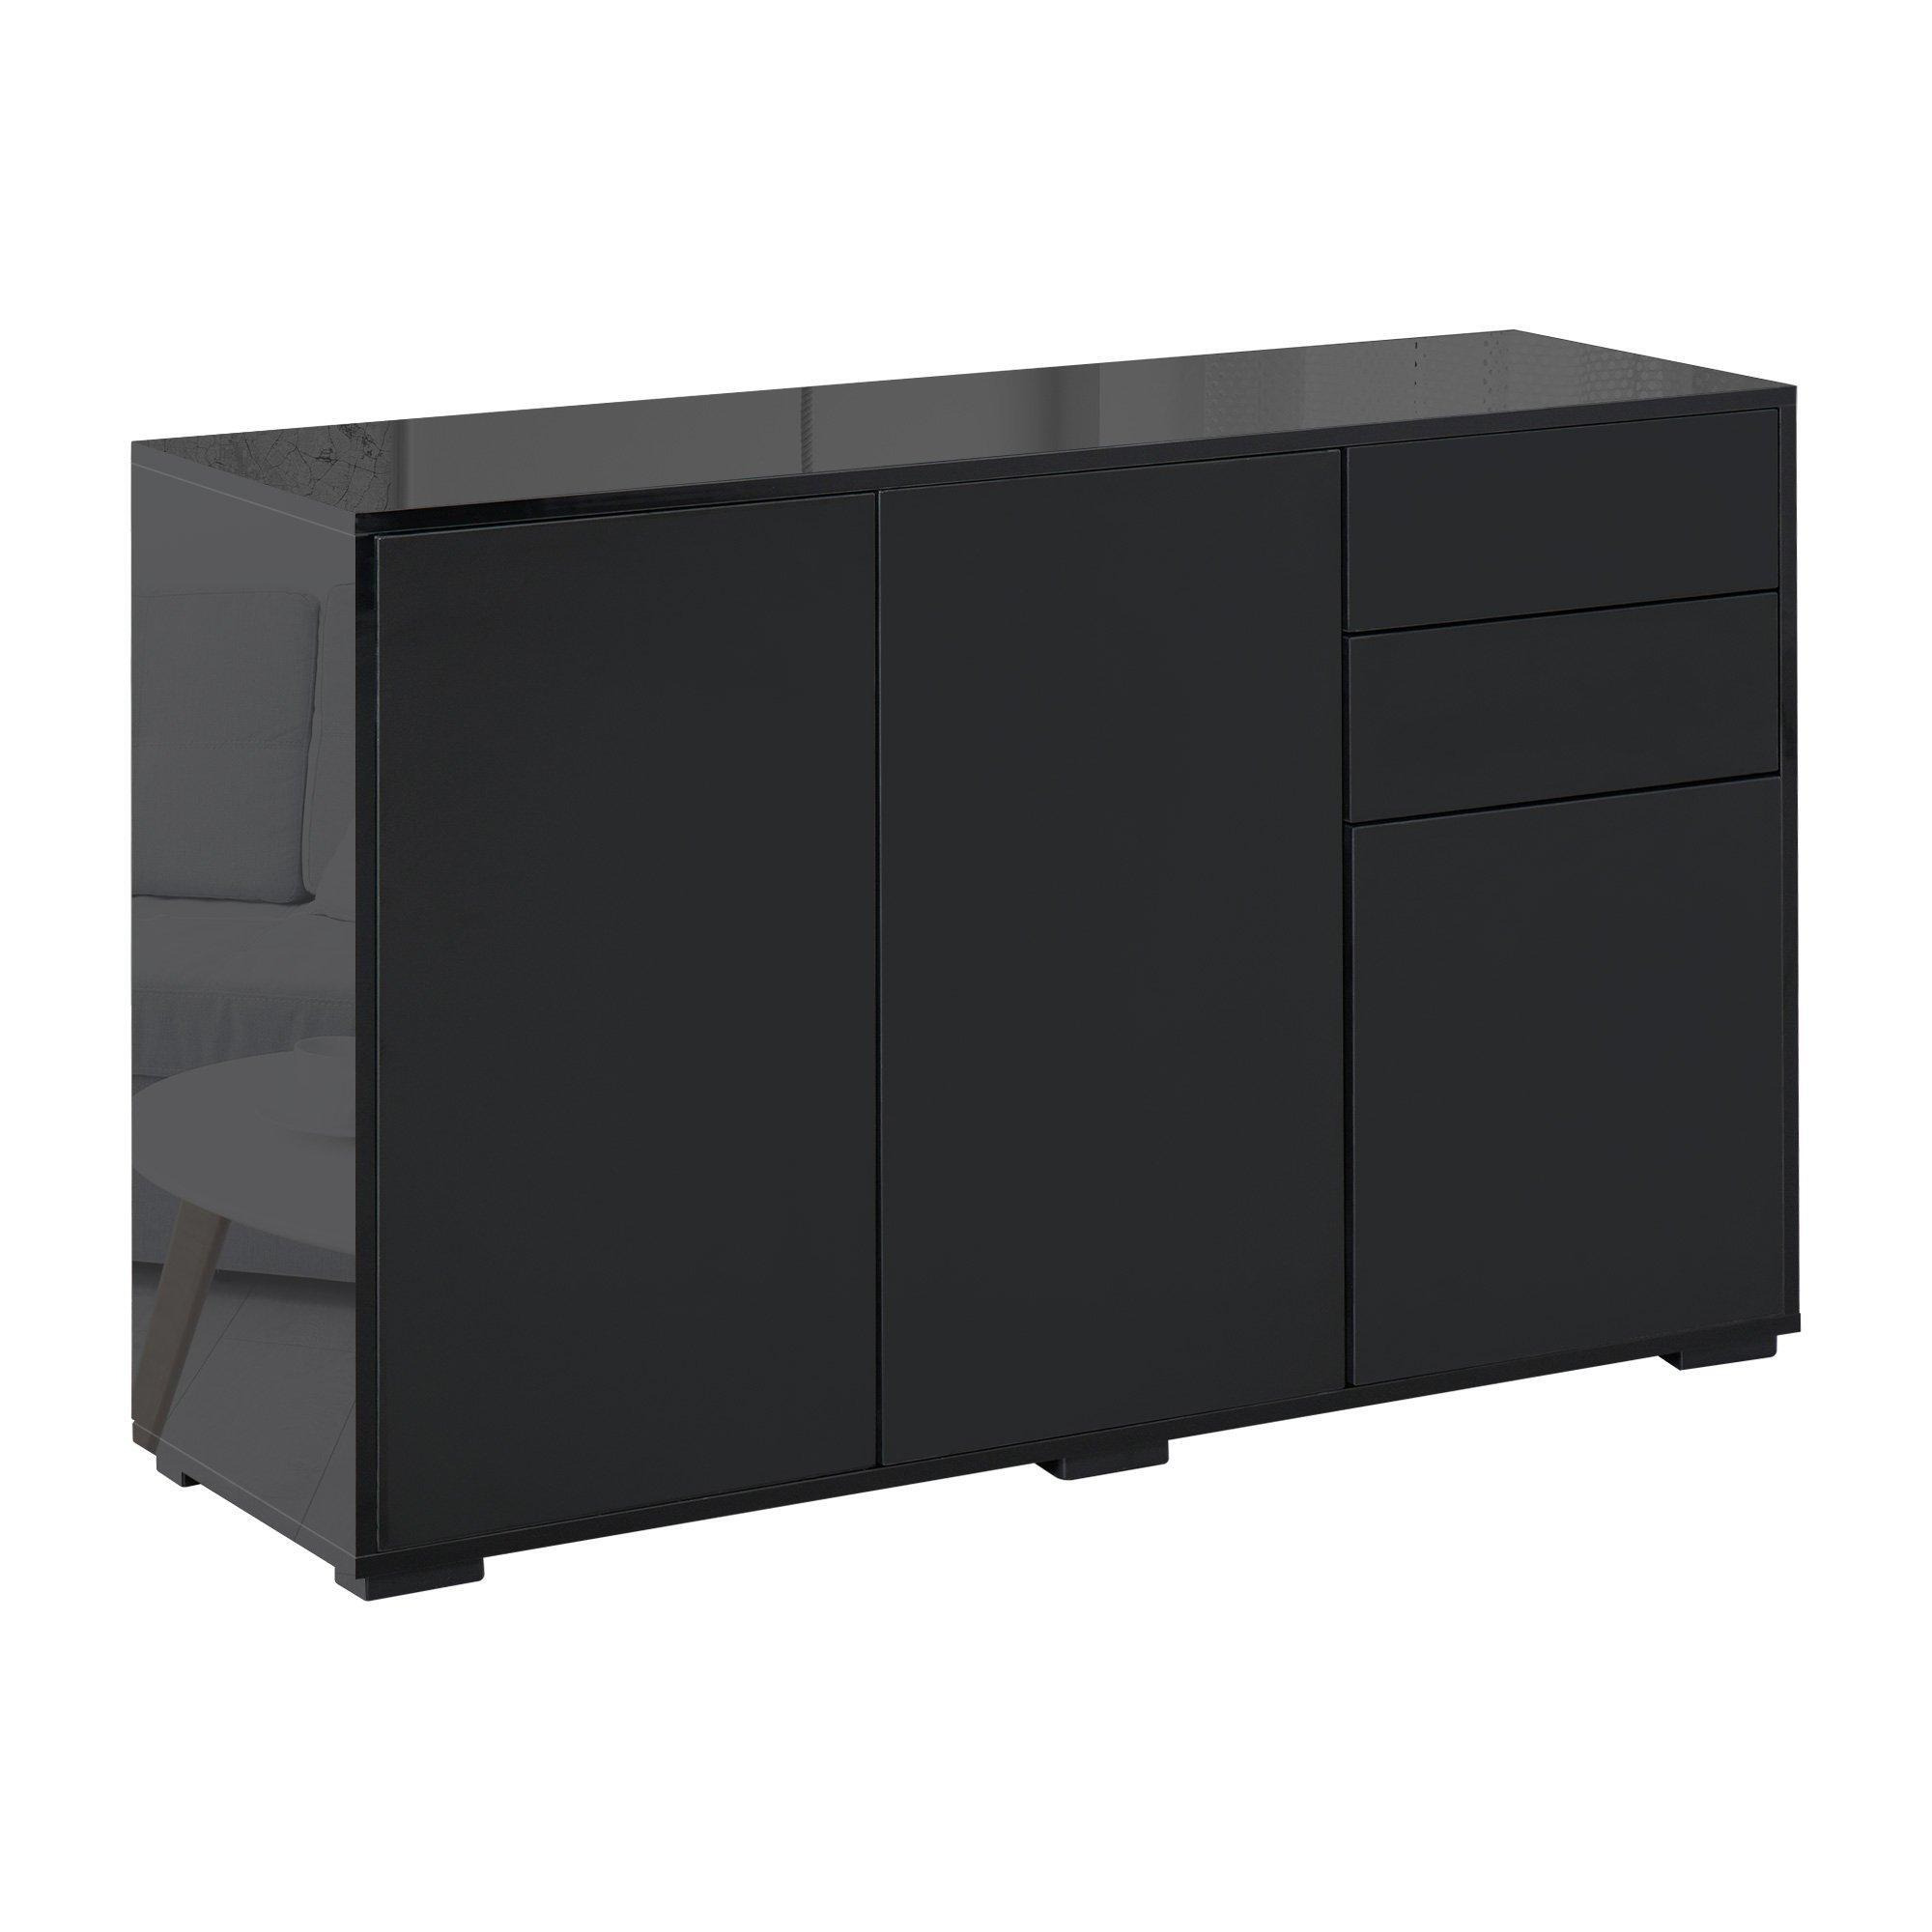 Push-Open Side Cabinet with 2 Drawer 2 Door Cabinet for Home Office - image 1